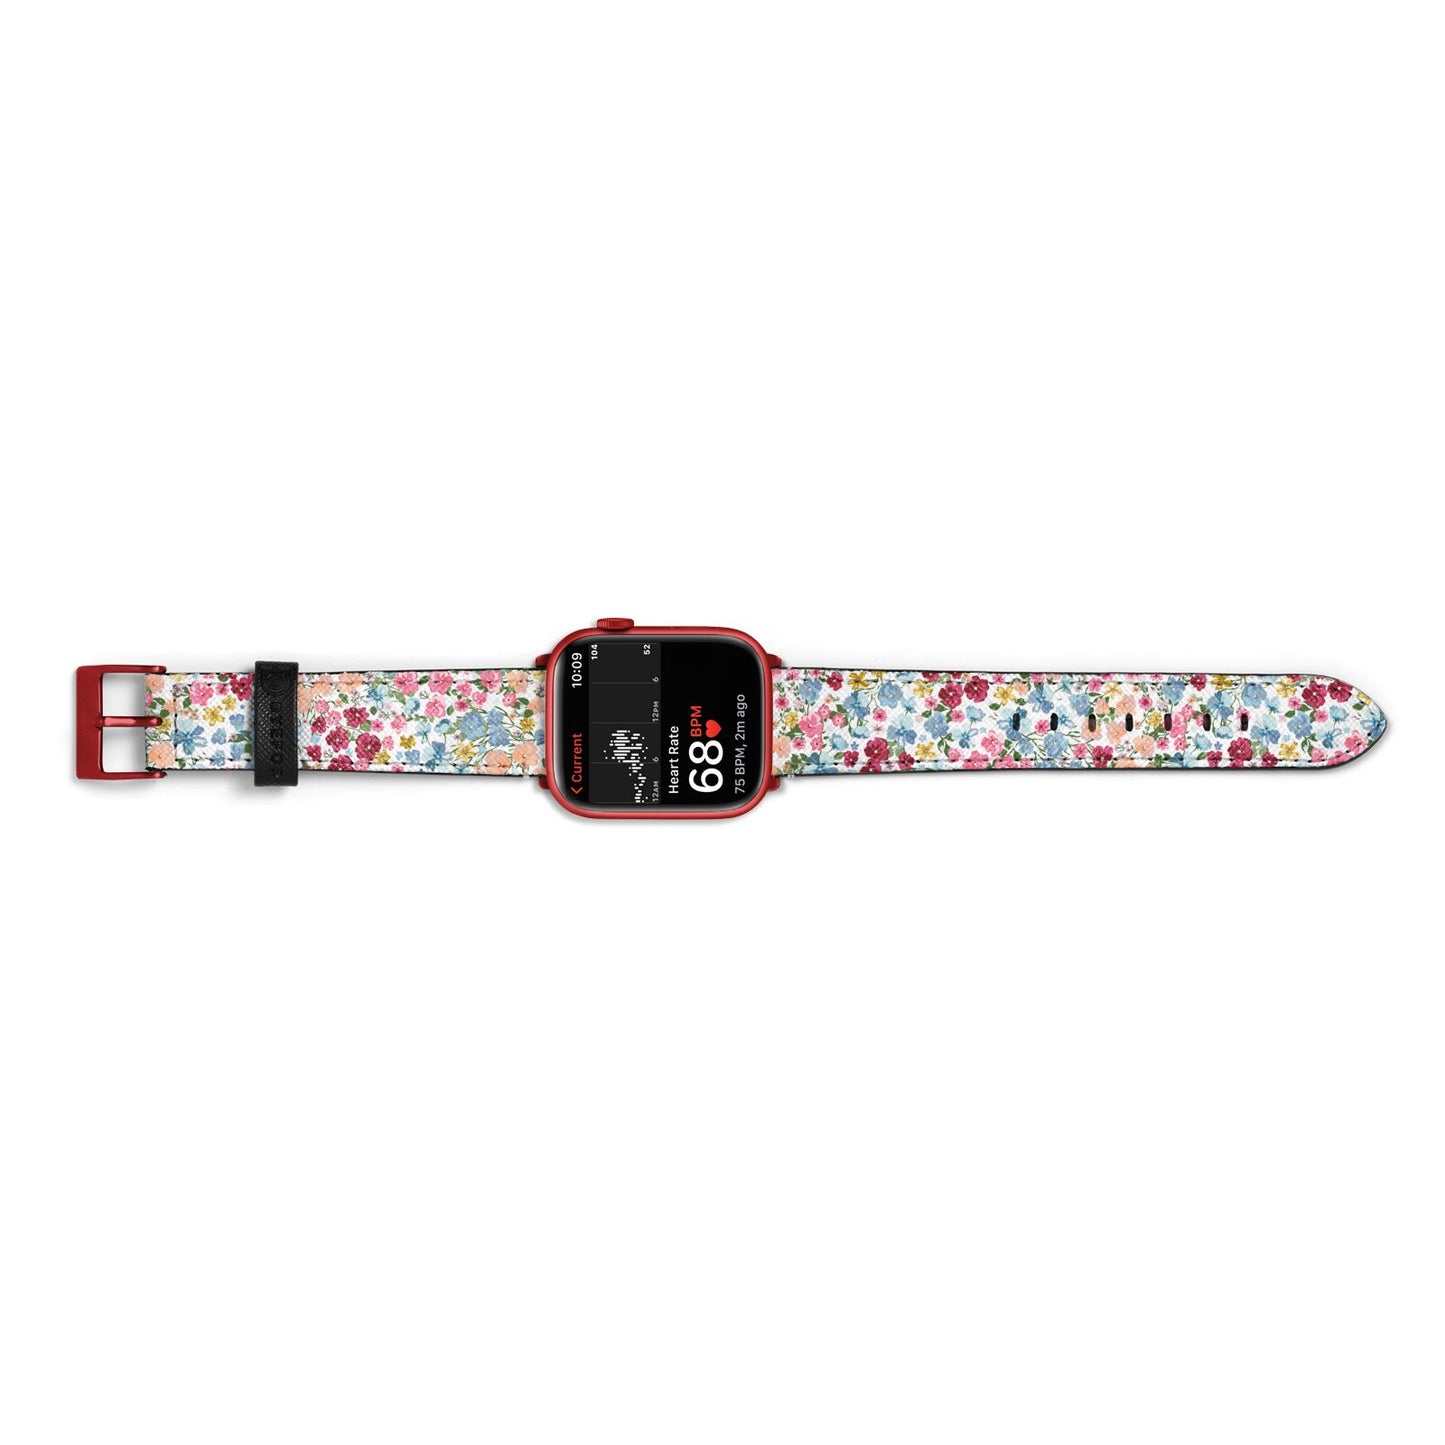 Floral Meadow Apple Watch Strap Size 38mm Landscape Image Red Hardware